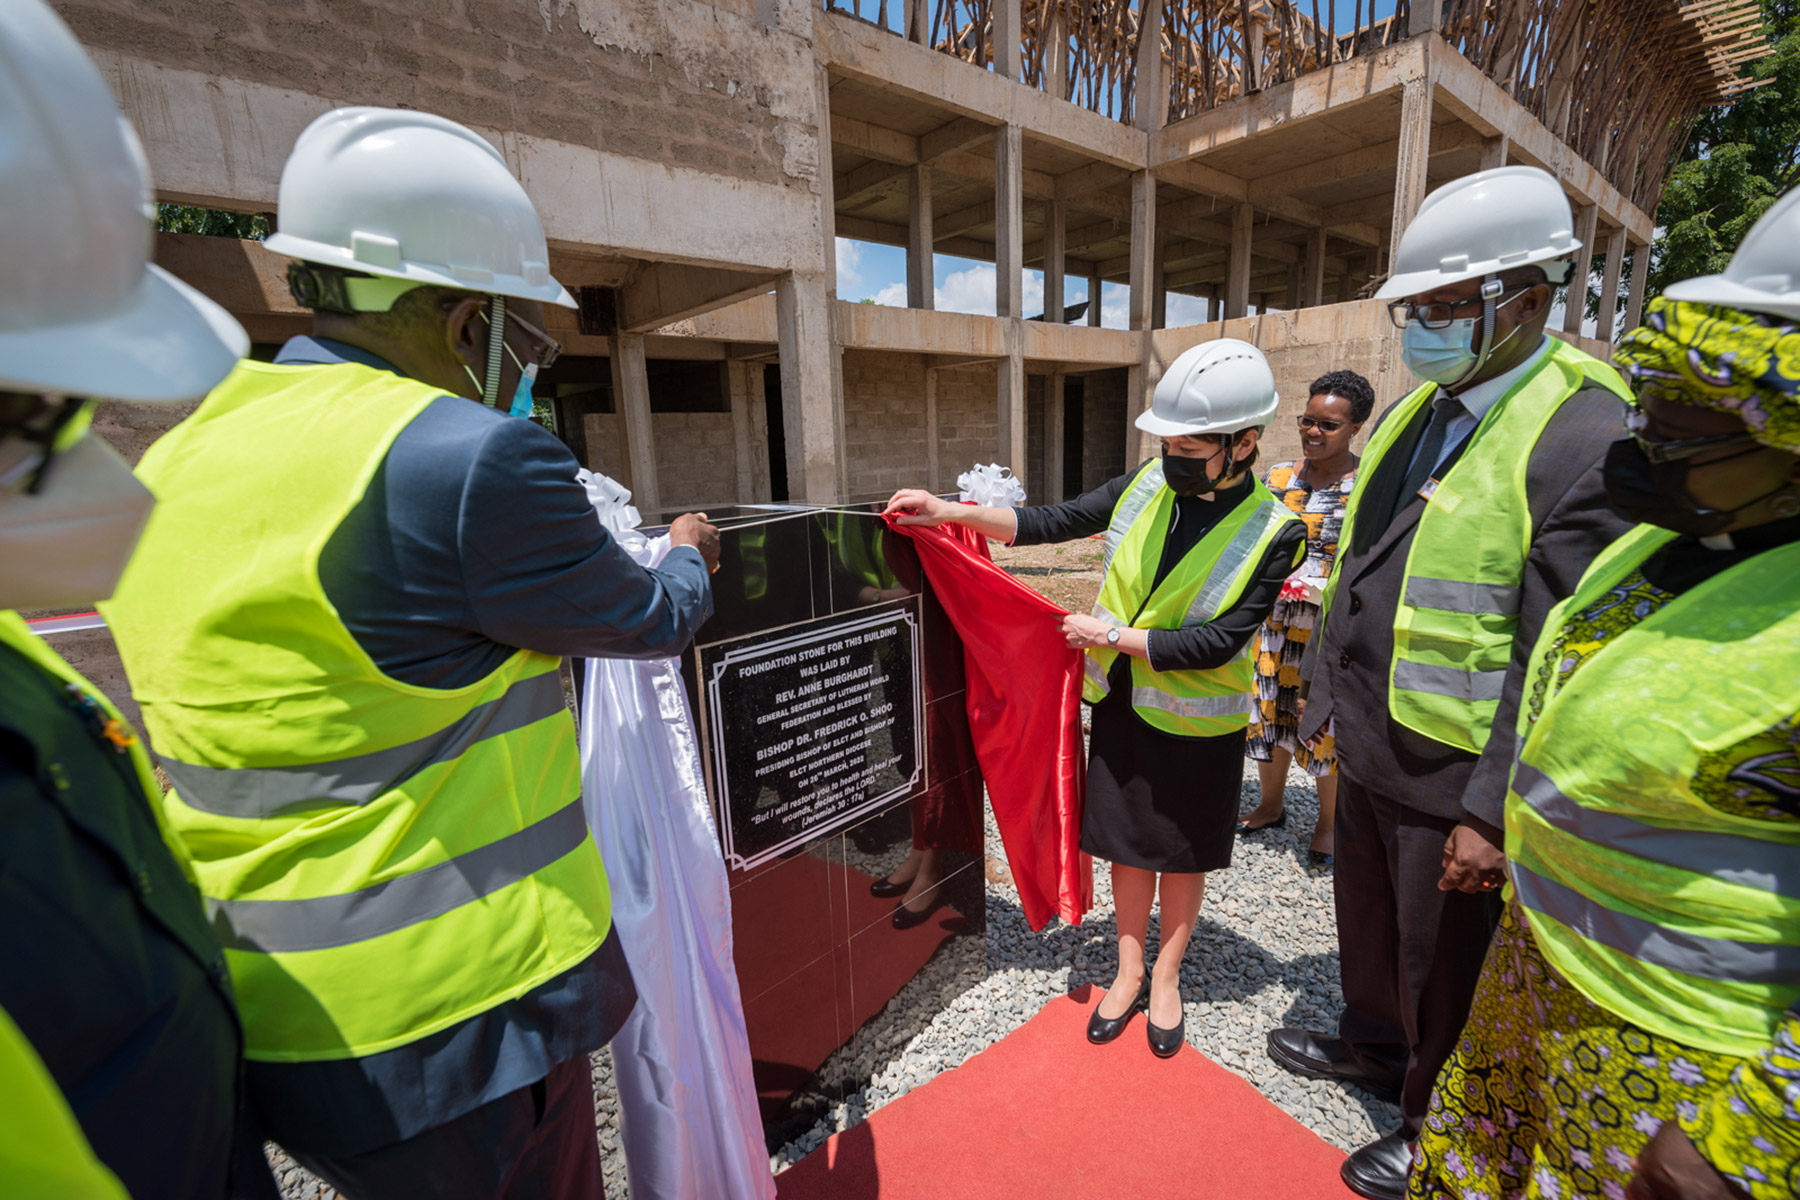 ELCT Presiding Bishop Dr Fredrick Shoo (left) and LWF General Secretary Rev. Anne Burghardt (right) unveil a foundational stone at a construction site for what is to become a hostel for cancer patients to the Kilimanjaro Christian Medical Centre of the ELCT.